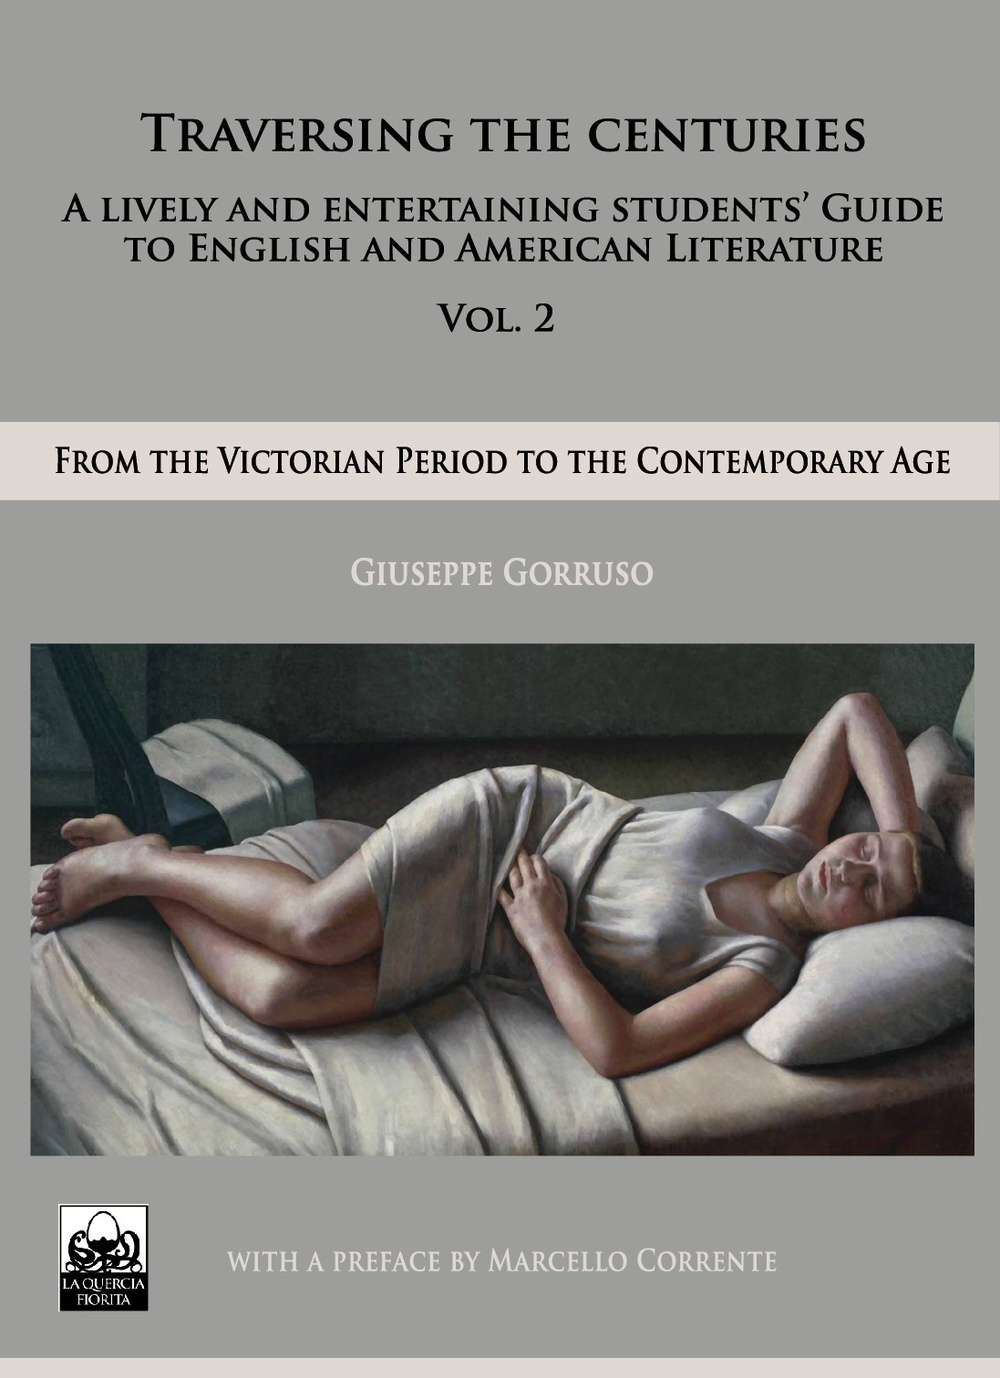 Traversing the censuries. A lively and entertaining guide to english and american literature. Vol. 2: From the victorian period ro the contemporary